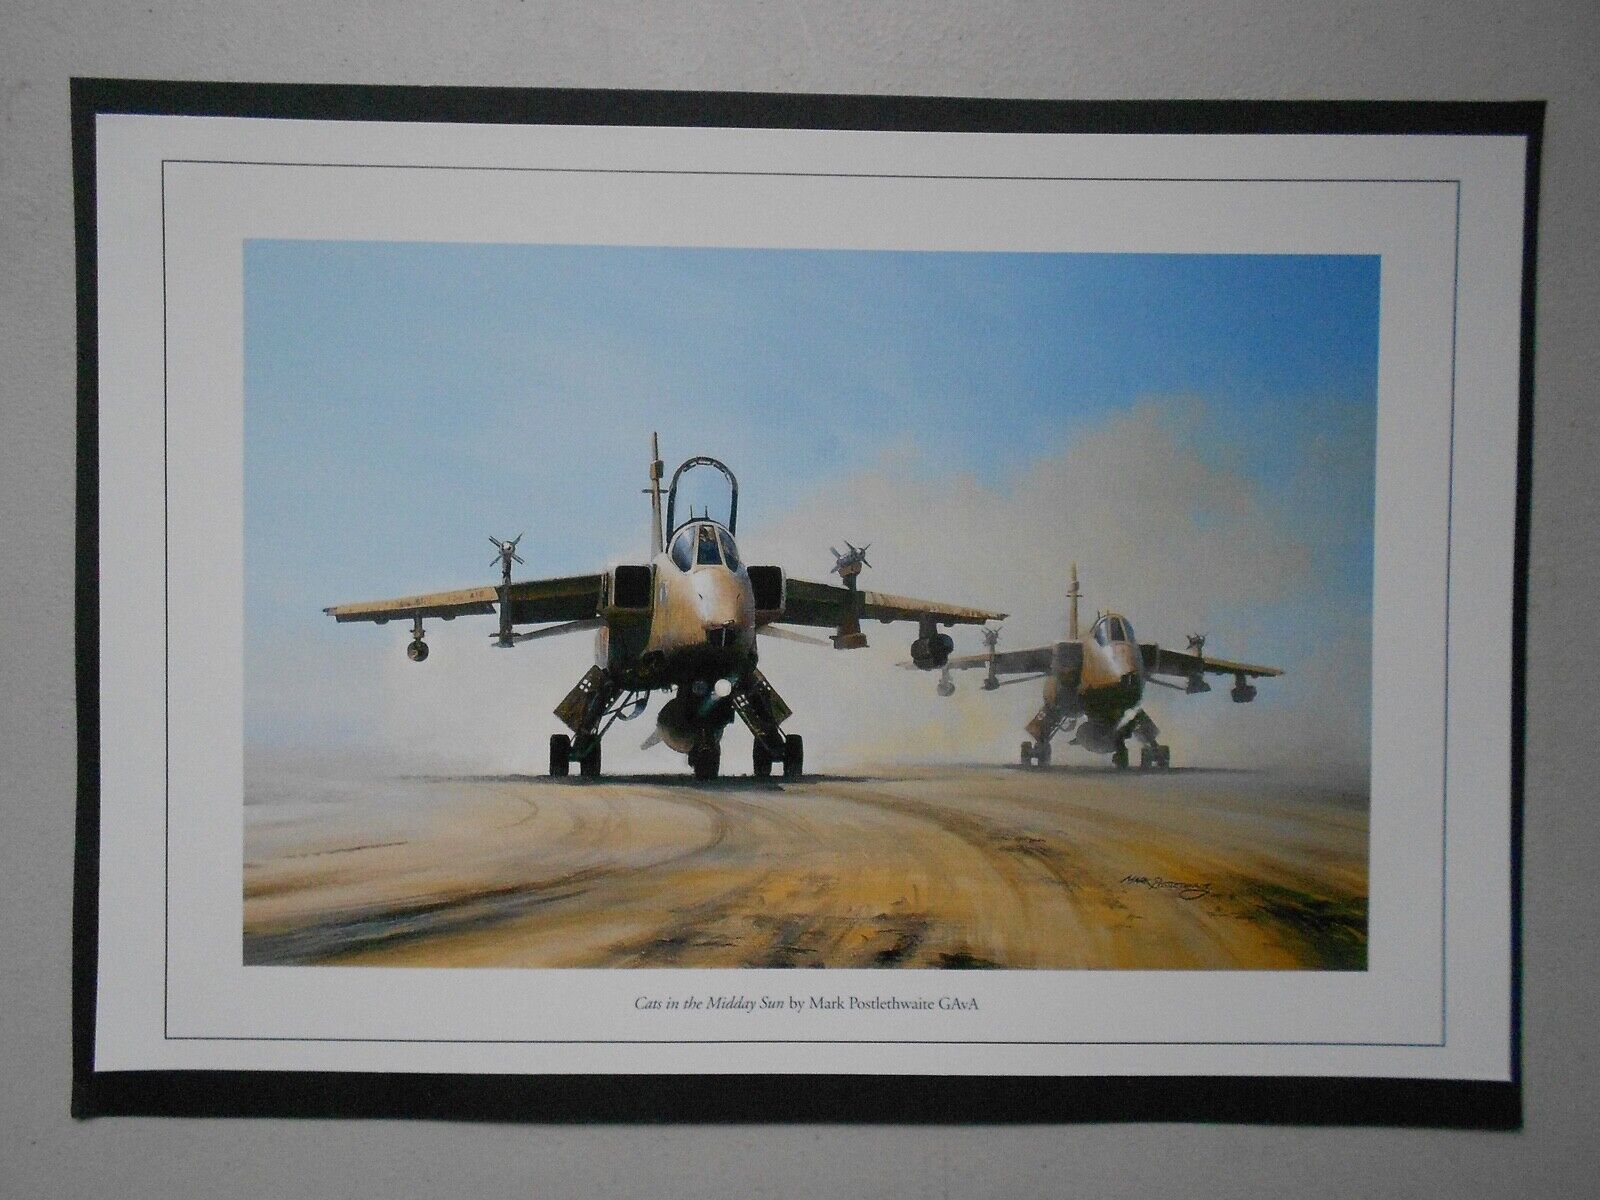 MILITARY AVIATION PRINT-  CATS IN THE MIDDAY SUN BY MARK POSTLETHWAITE